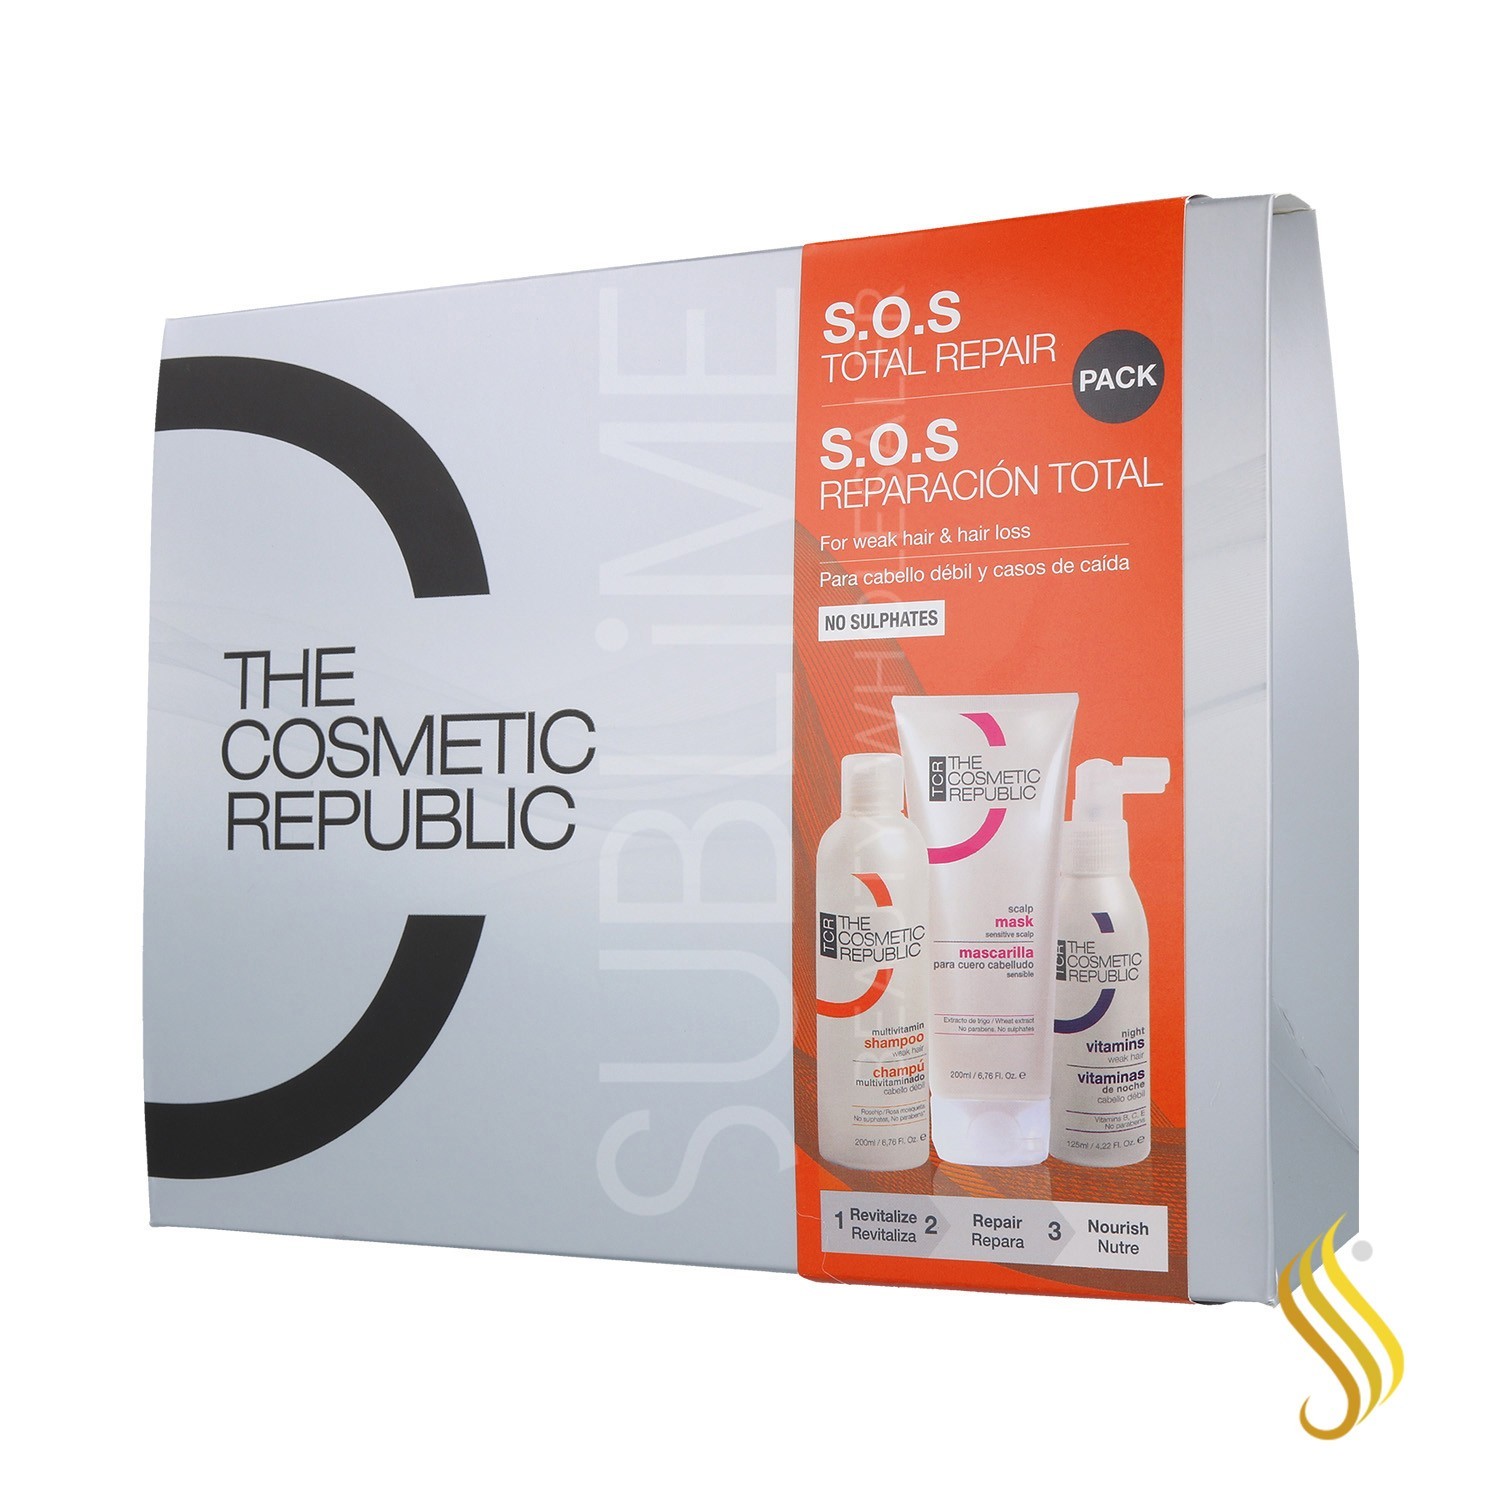 The Cosmetic Republic Pack S.O.S Total Repair (Shampooing/Masque/Vitamines)